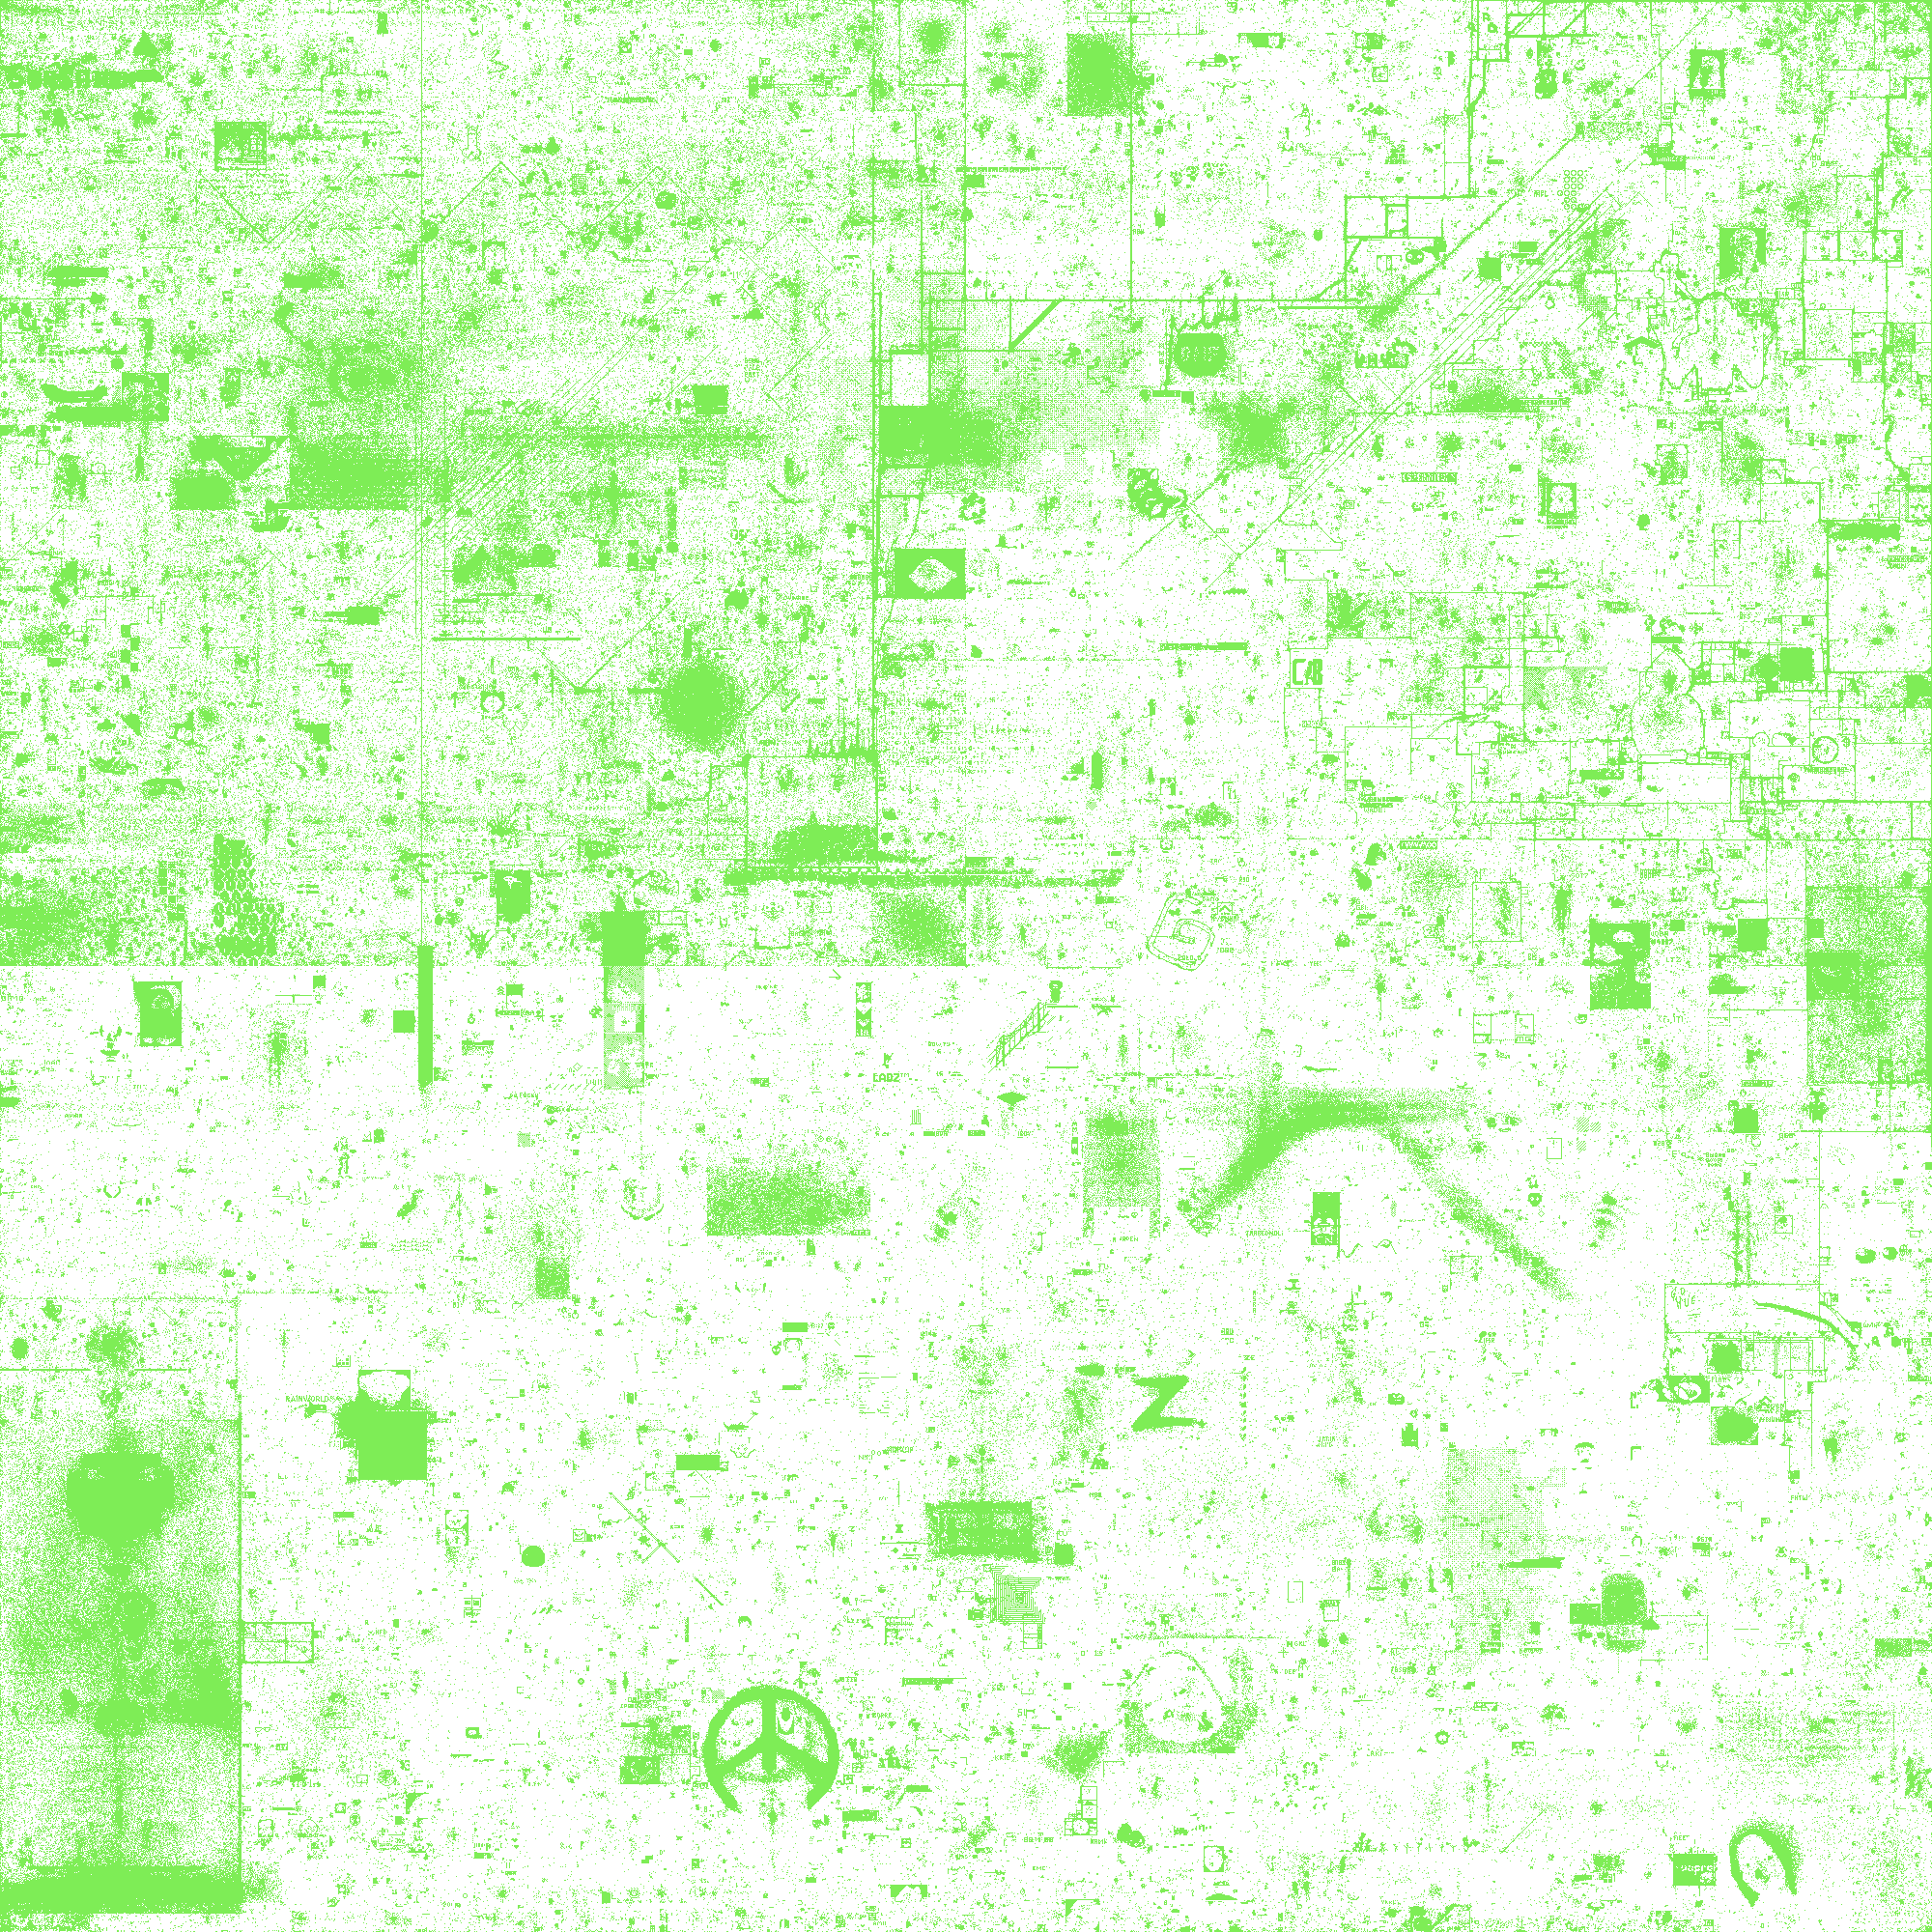 Light Green Only Visualization'